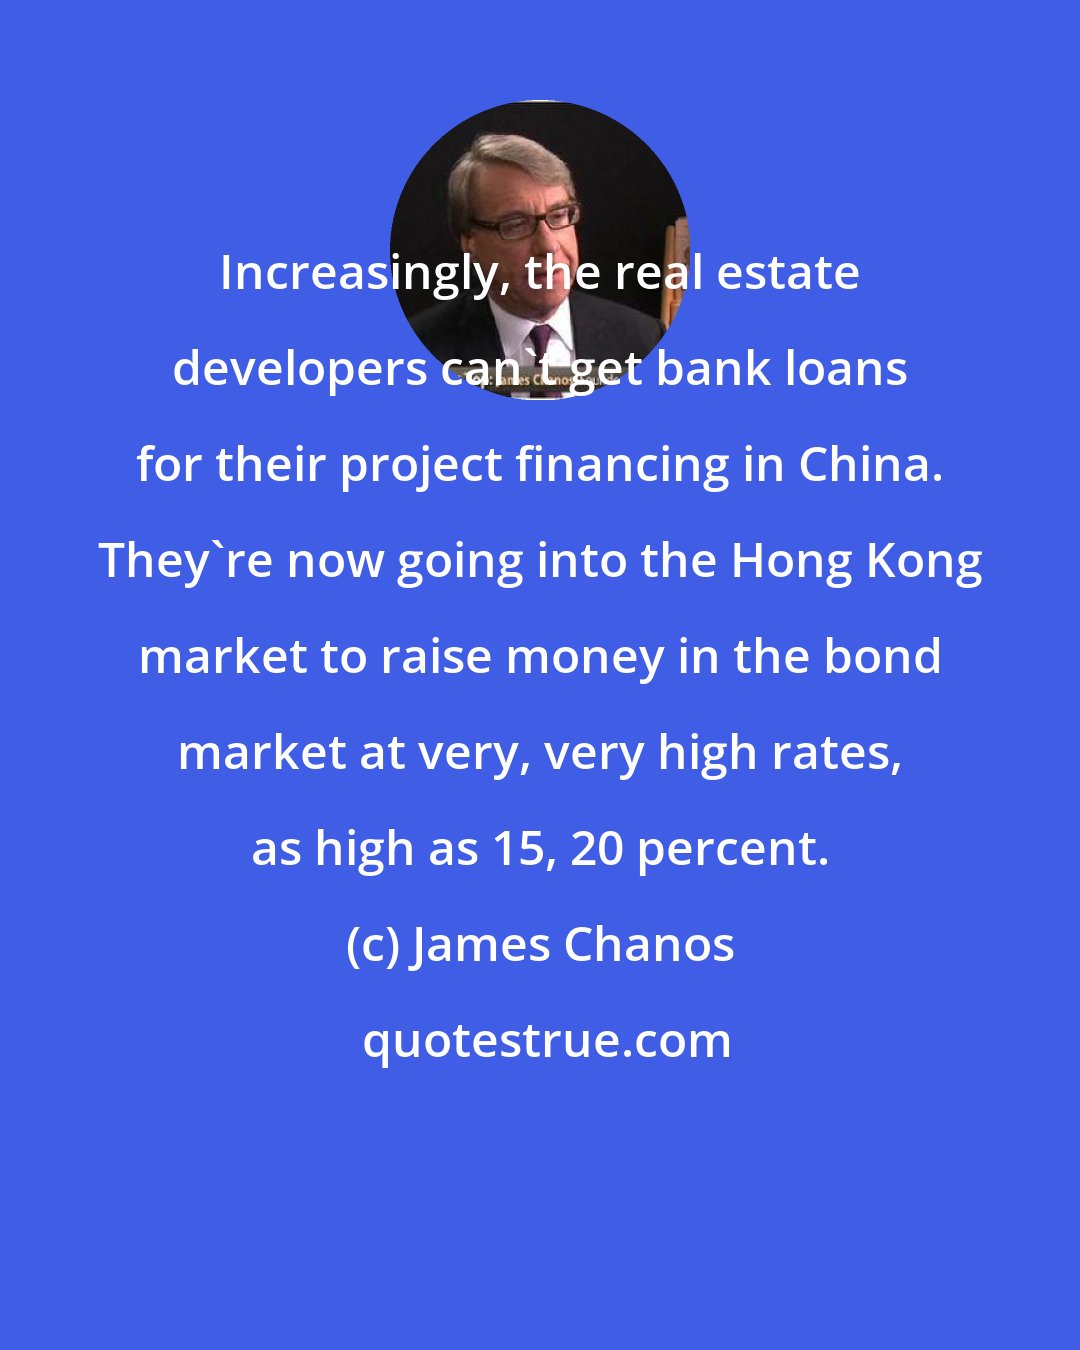 James Chanos: Increasingly, the real estate developers can't get bank loans for their project financing in China. They're now going into the Hong Kong market to raise money in the bond market at very, very high rates, as high as 15, 20 percent.